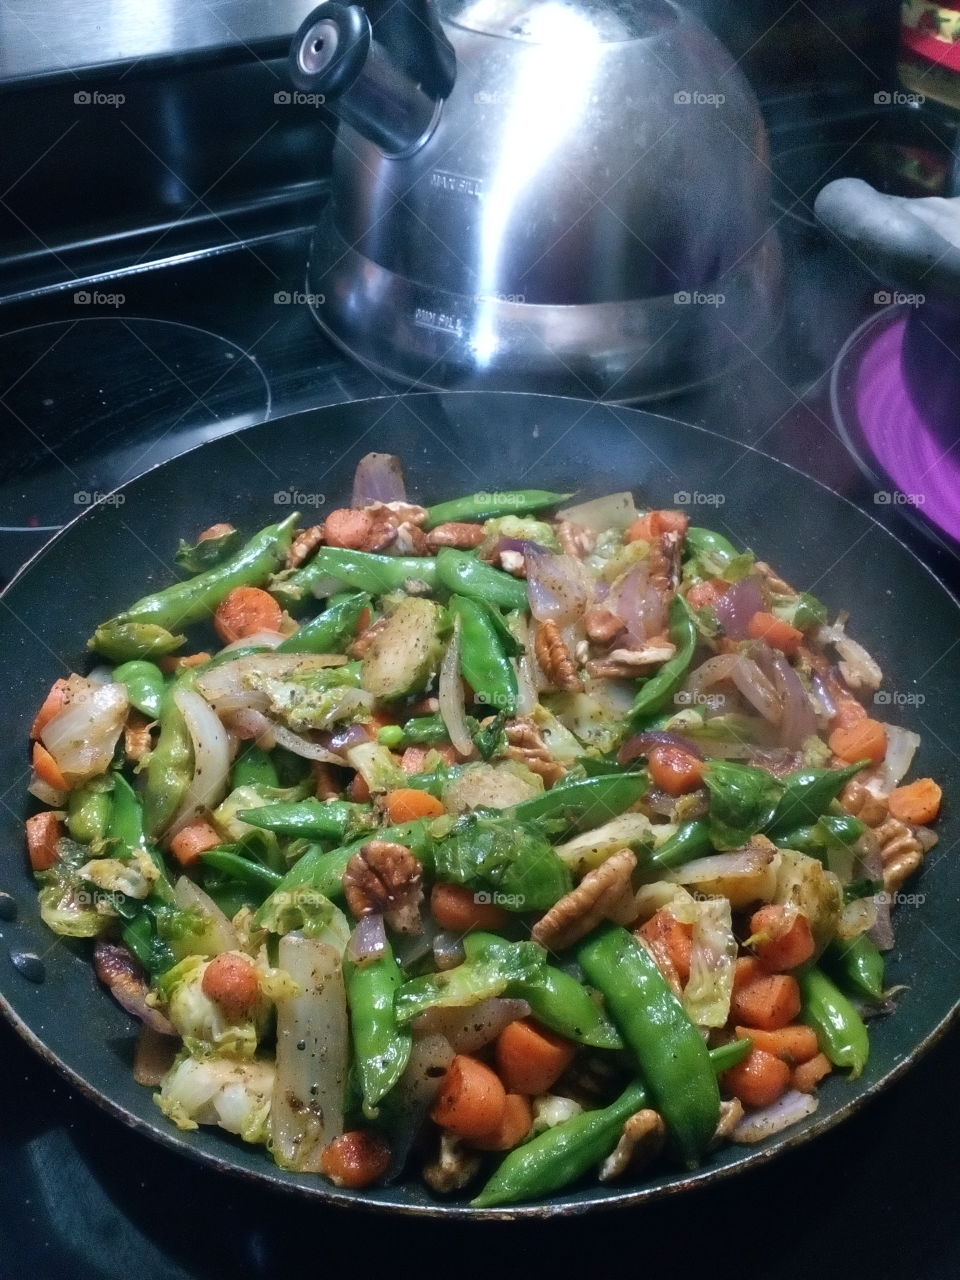 Food, Pan, No Person, Vegetable, Cooking